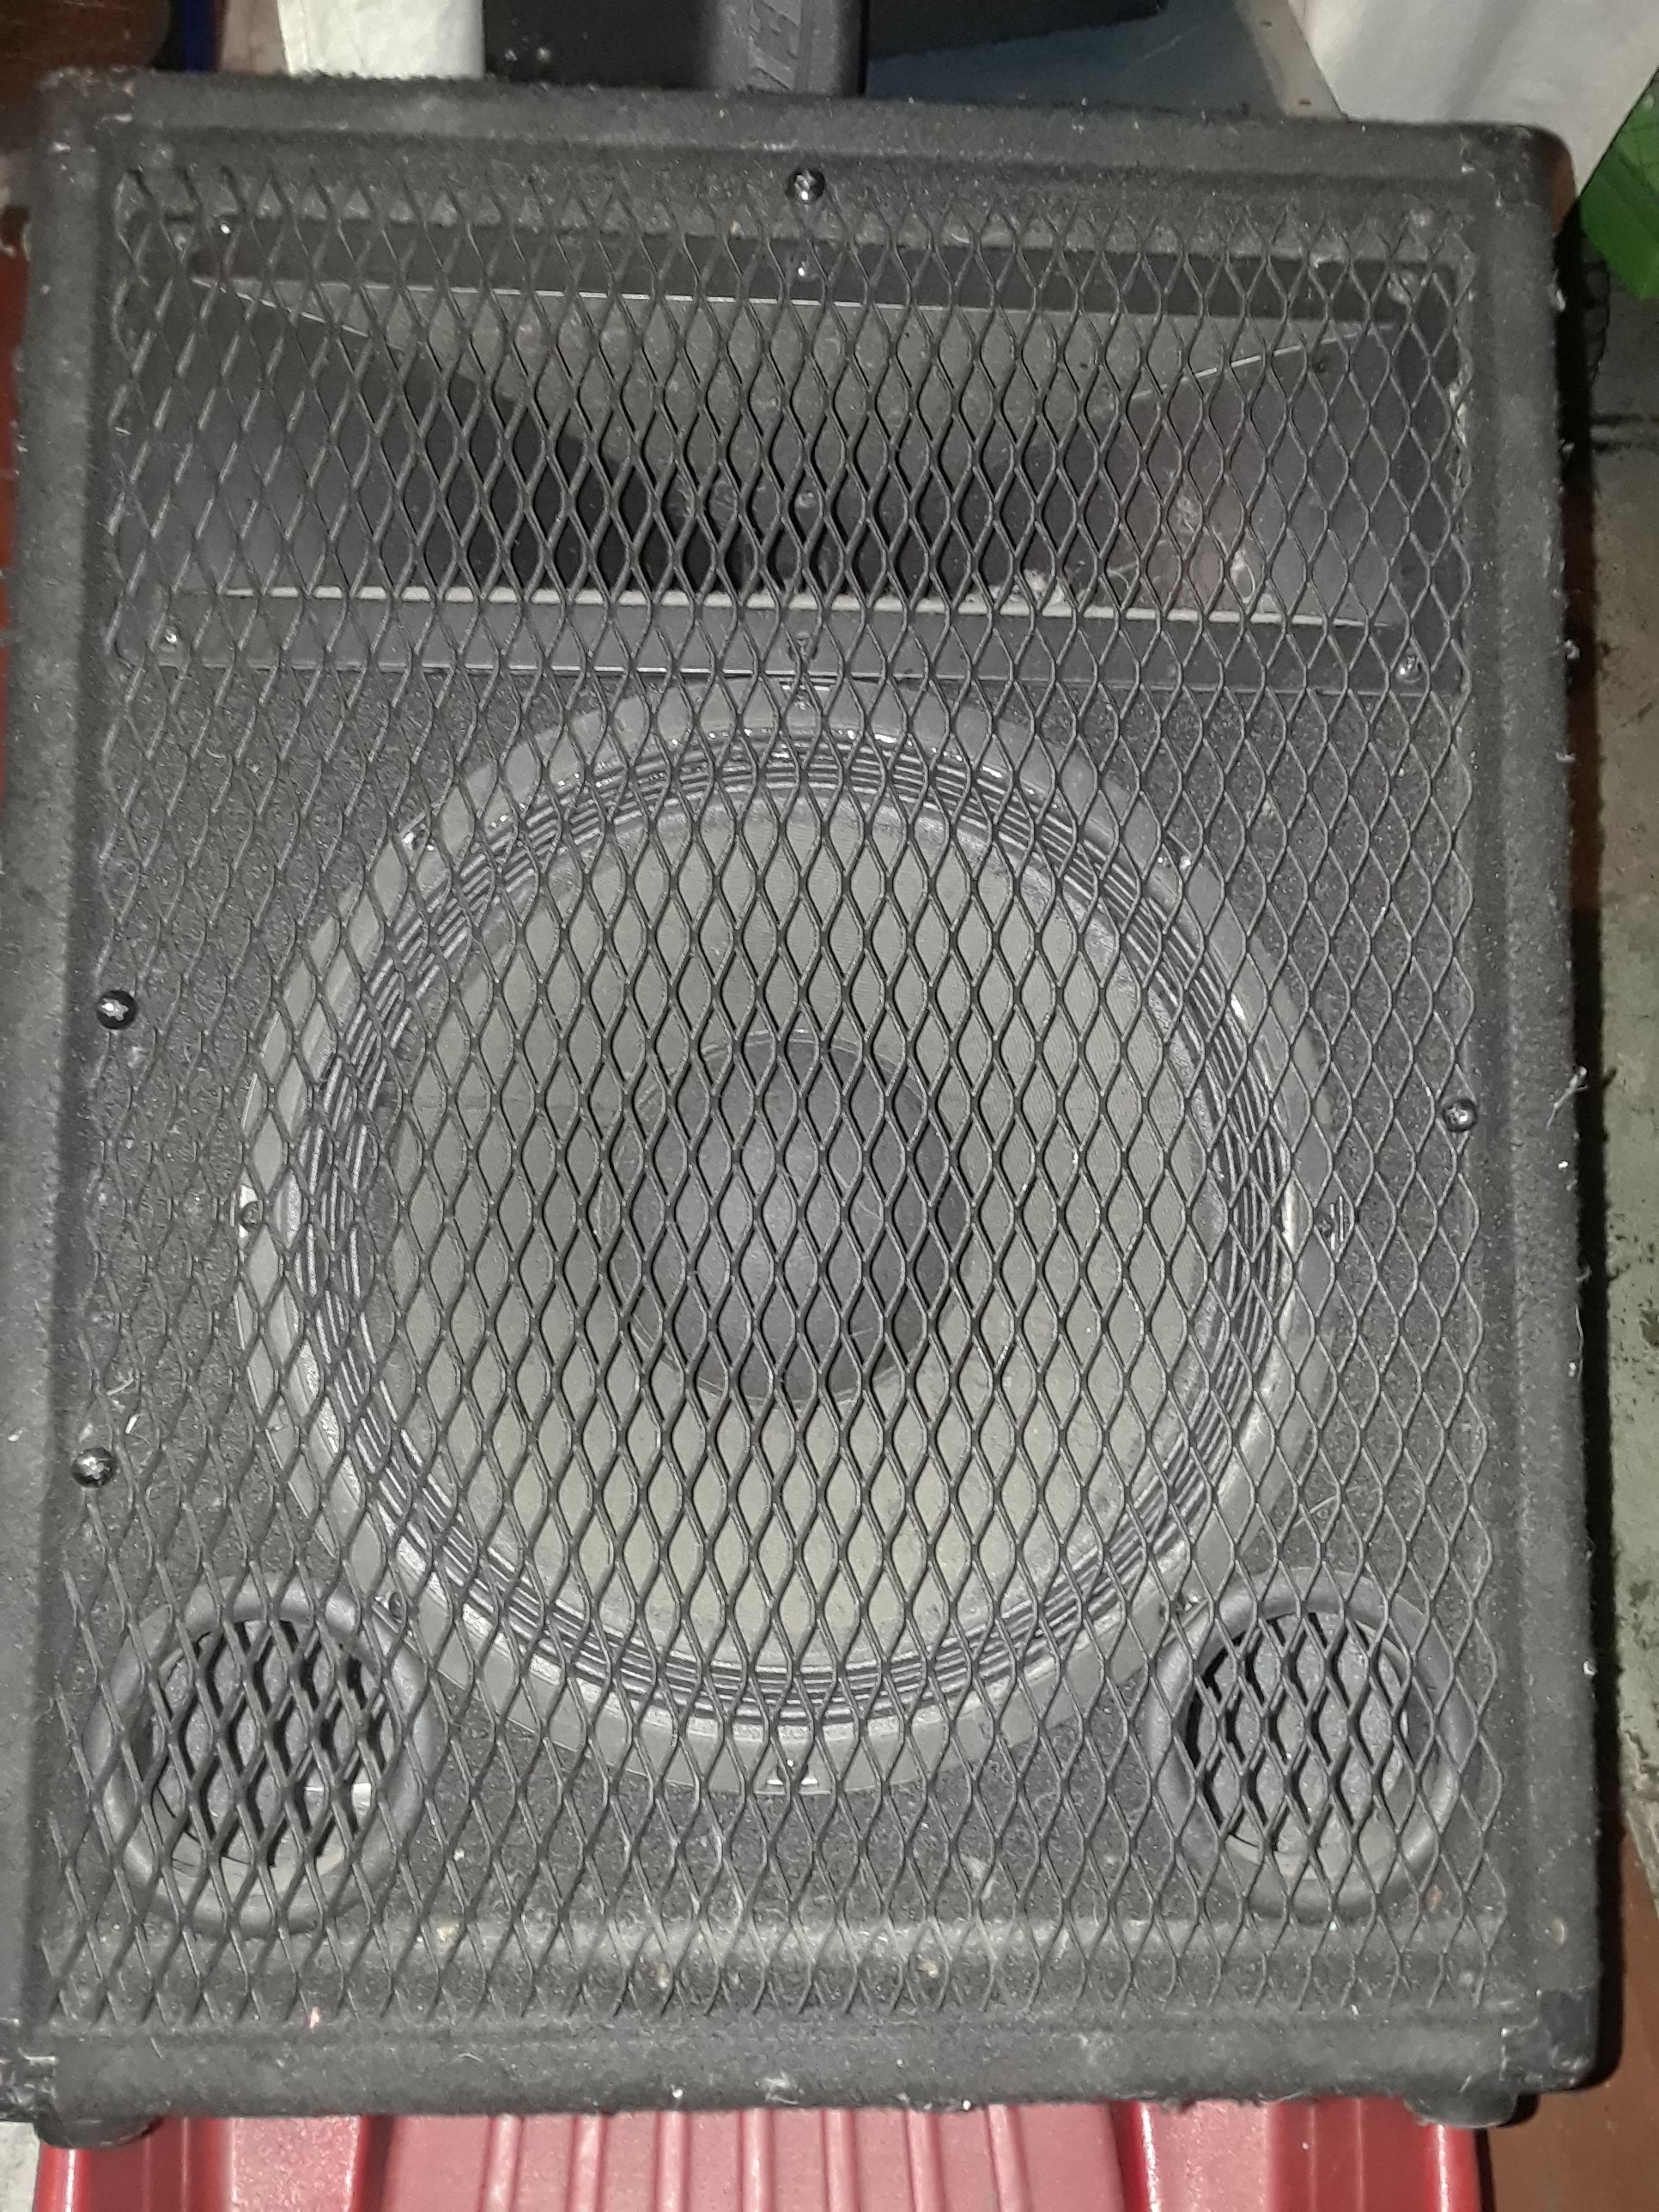 2 Carvin 12 inch with stand hole 300 watt P.A. or monitor speakers passive